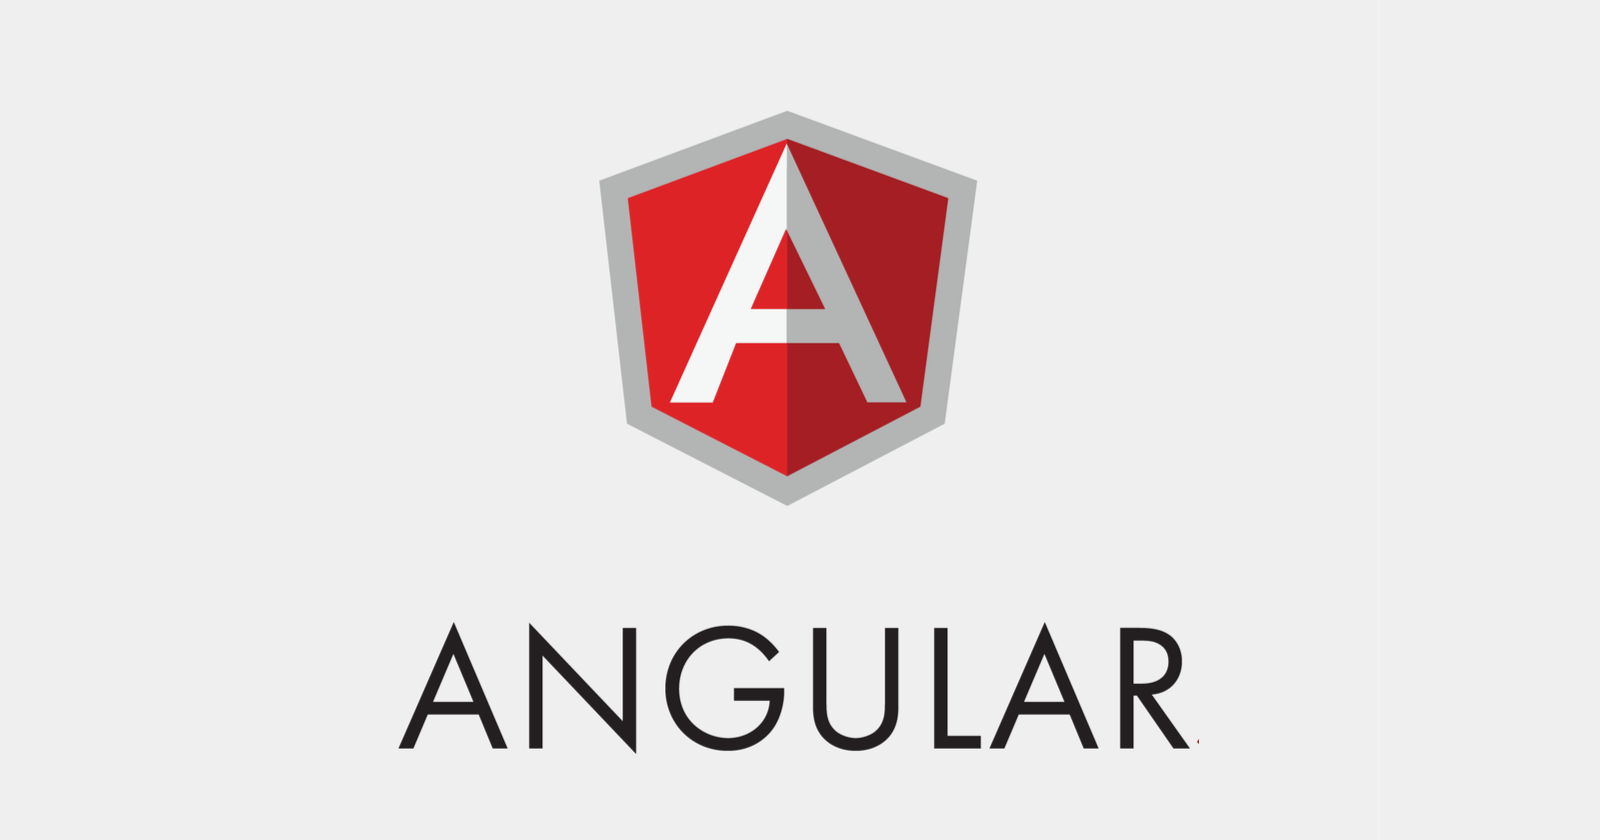 The strong sides of Angular